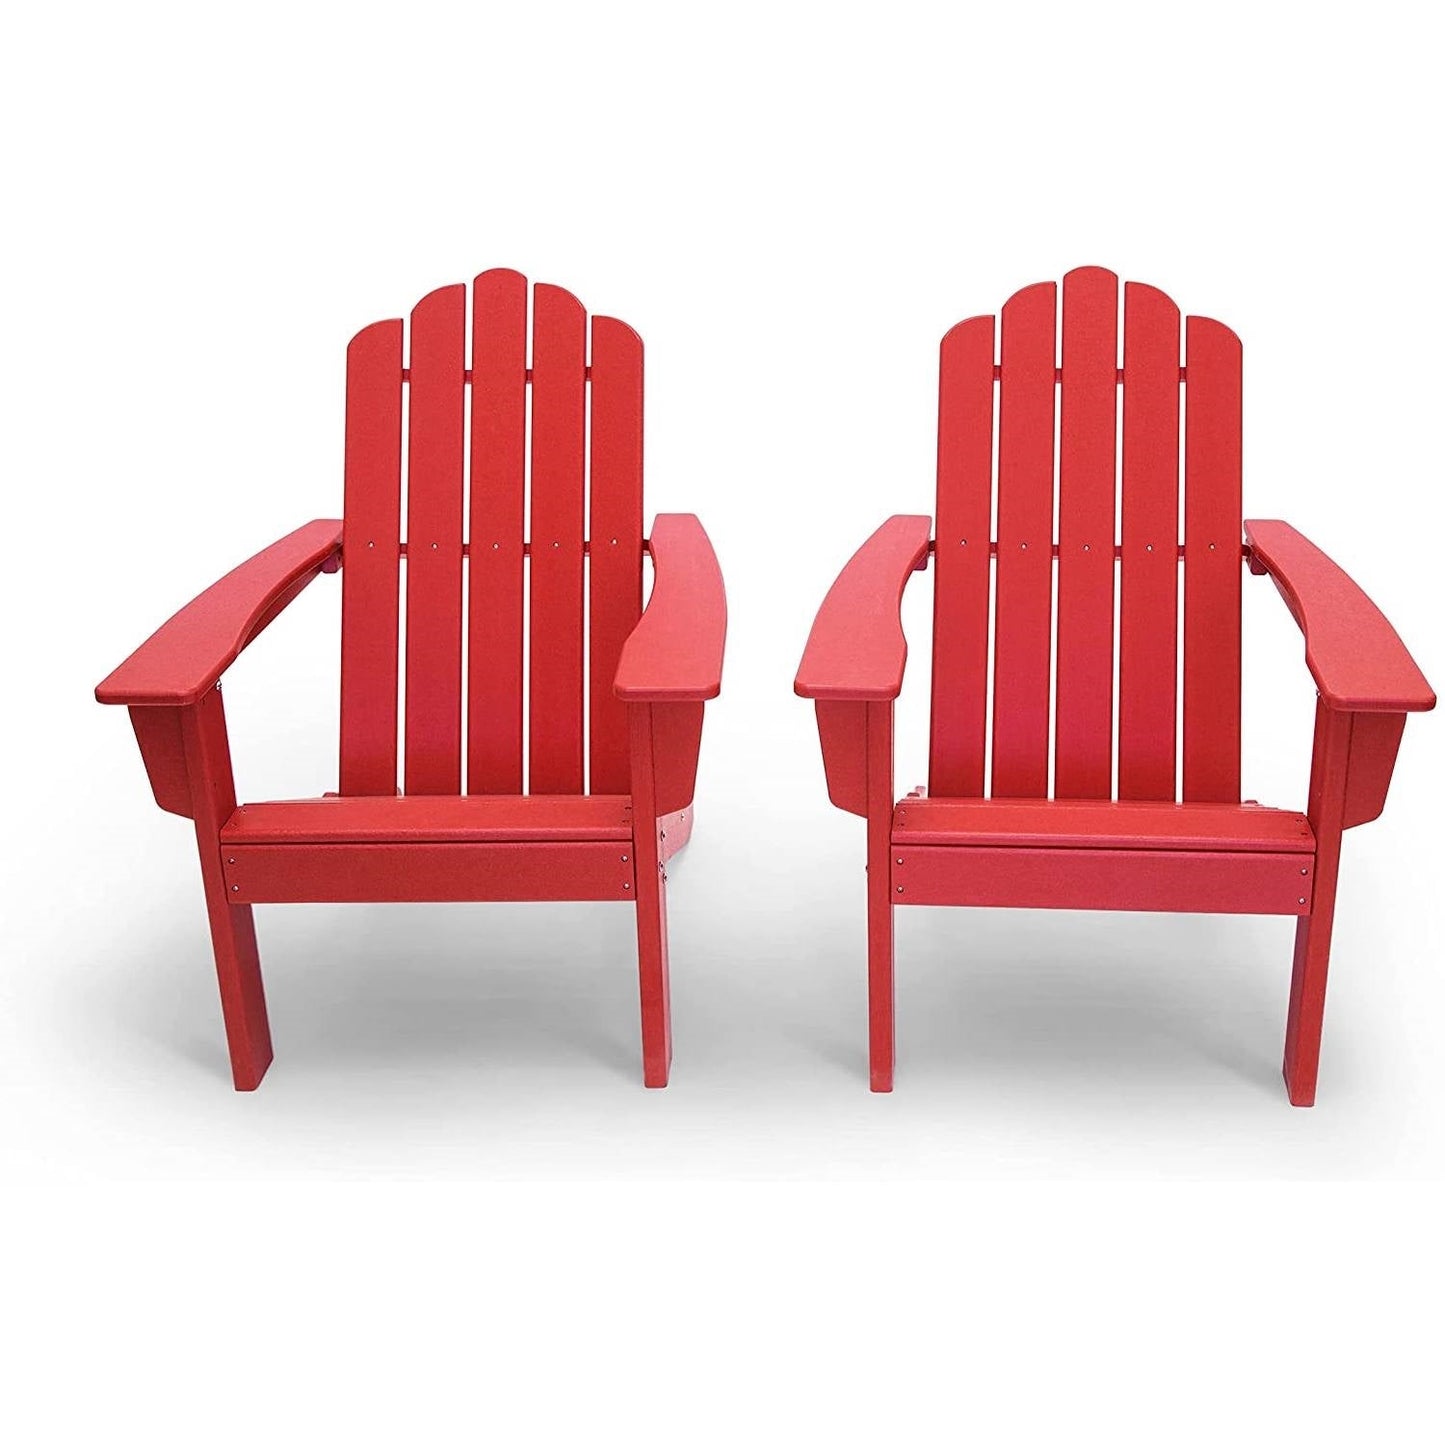 Outdoor > Outdoor Furniture > Adirondack Chairs - All Weather Recycled Red Poly Plastic Outdoor Patio Adirondack Chairs - Set Of 2